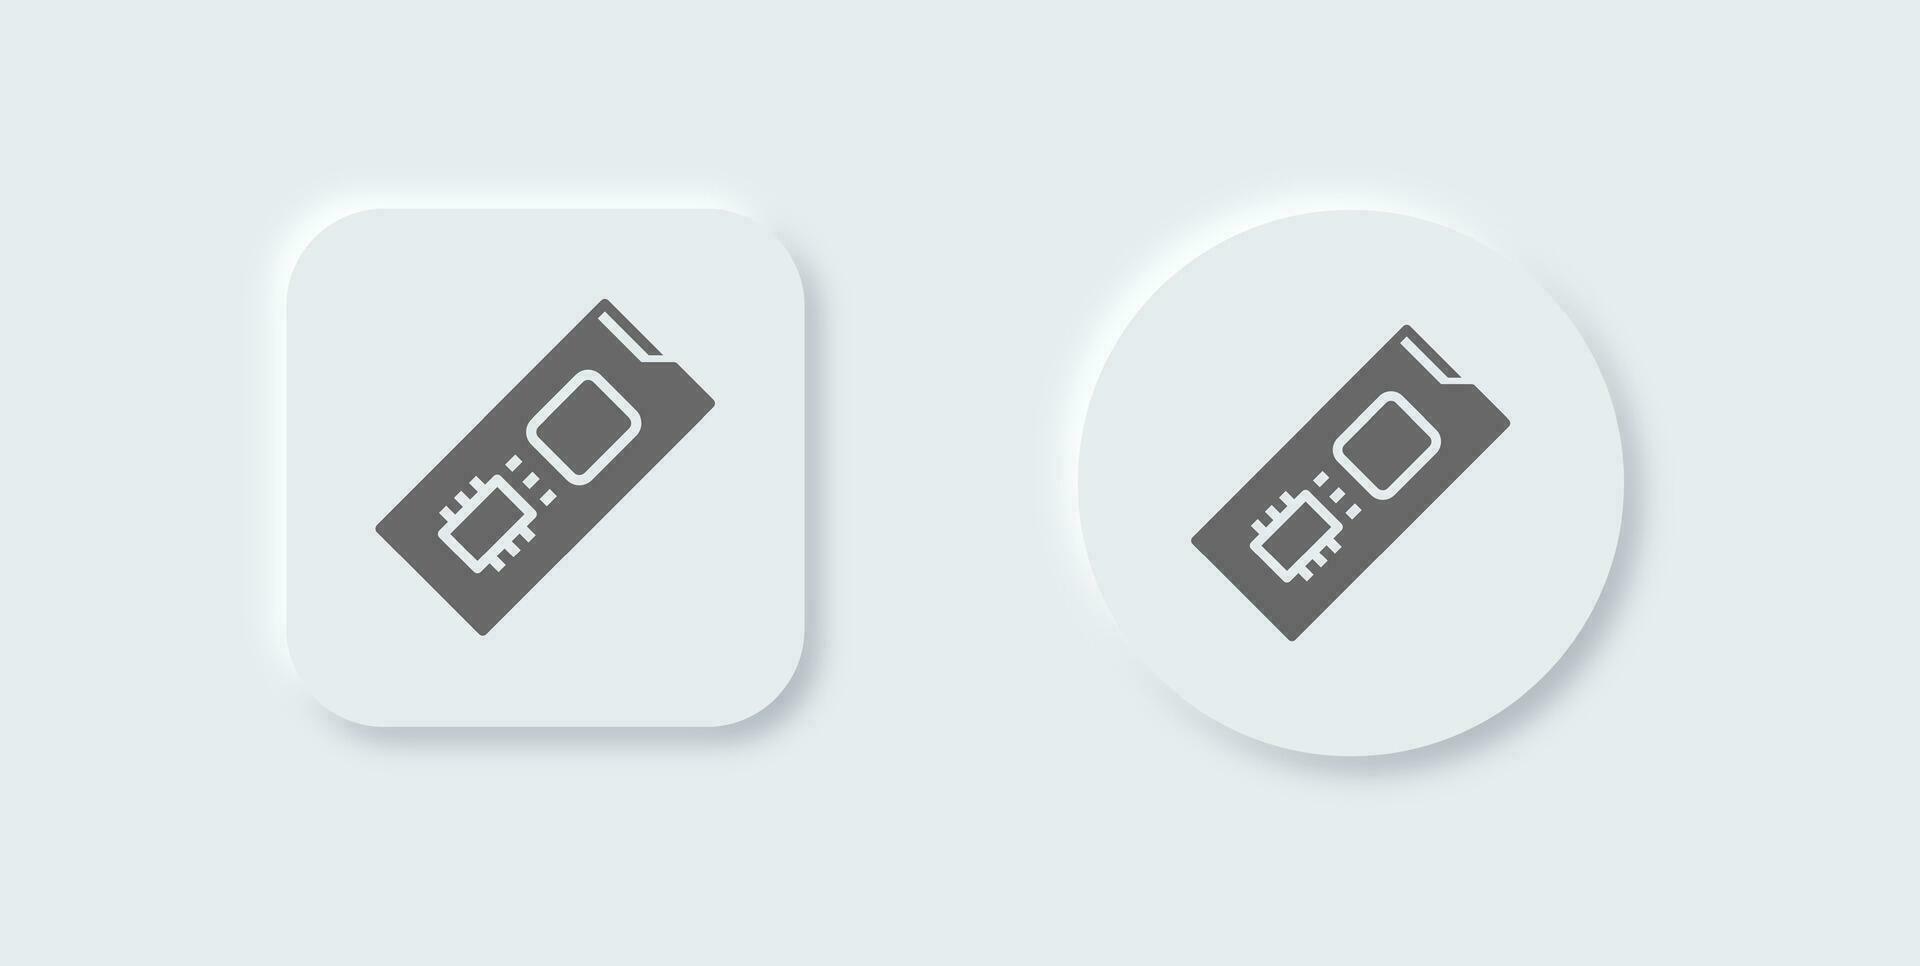 Ssd solid icon in neomorphic design style. Drive signs vector illustration.